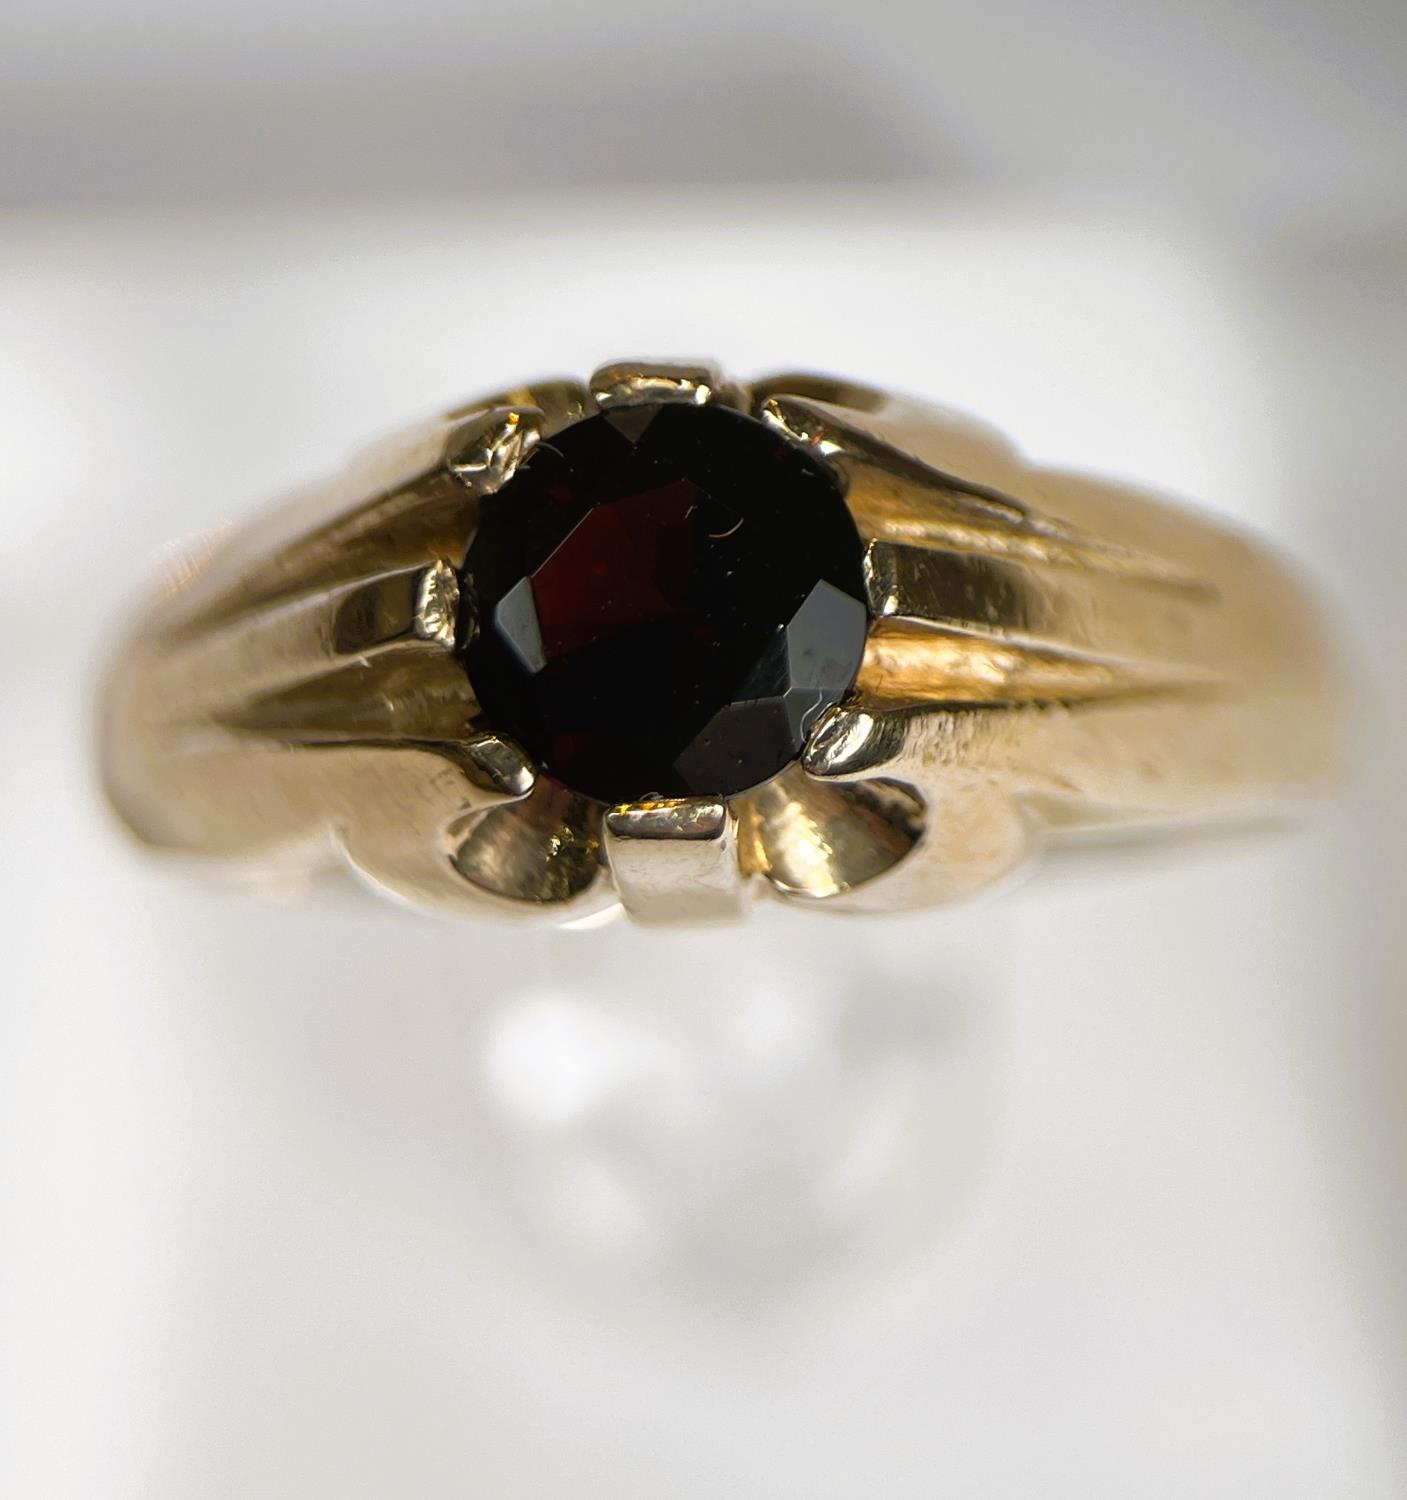 A 9ct gold dress ring set with garnet coloured stone, 4.9gms - Image 5 of 5